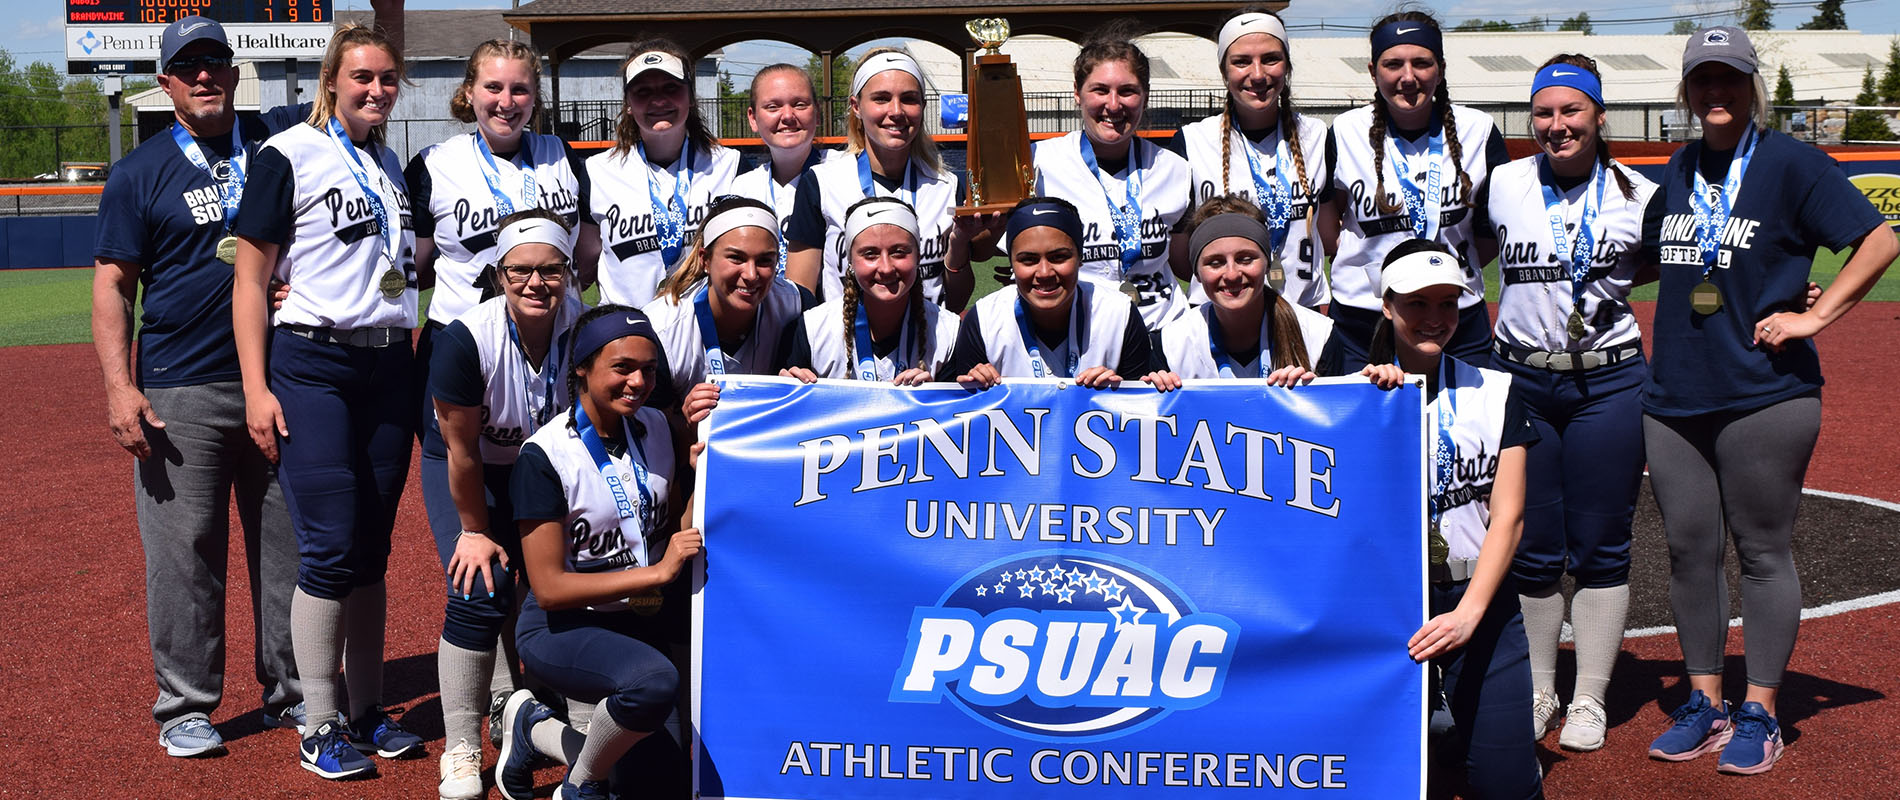 Penn State Brandywine's softball team captured their fifth consecutive PSUAC Championship, topping Penn State DuBois in the 2019 finals.